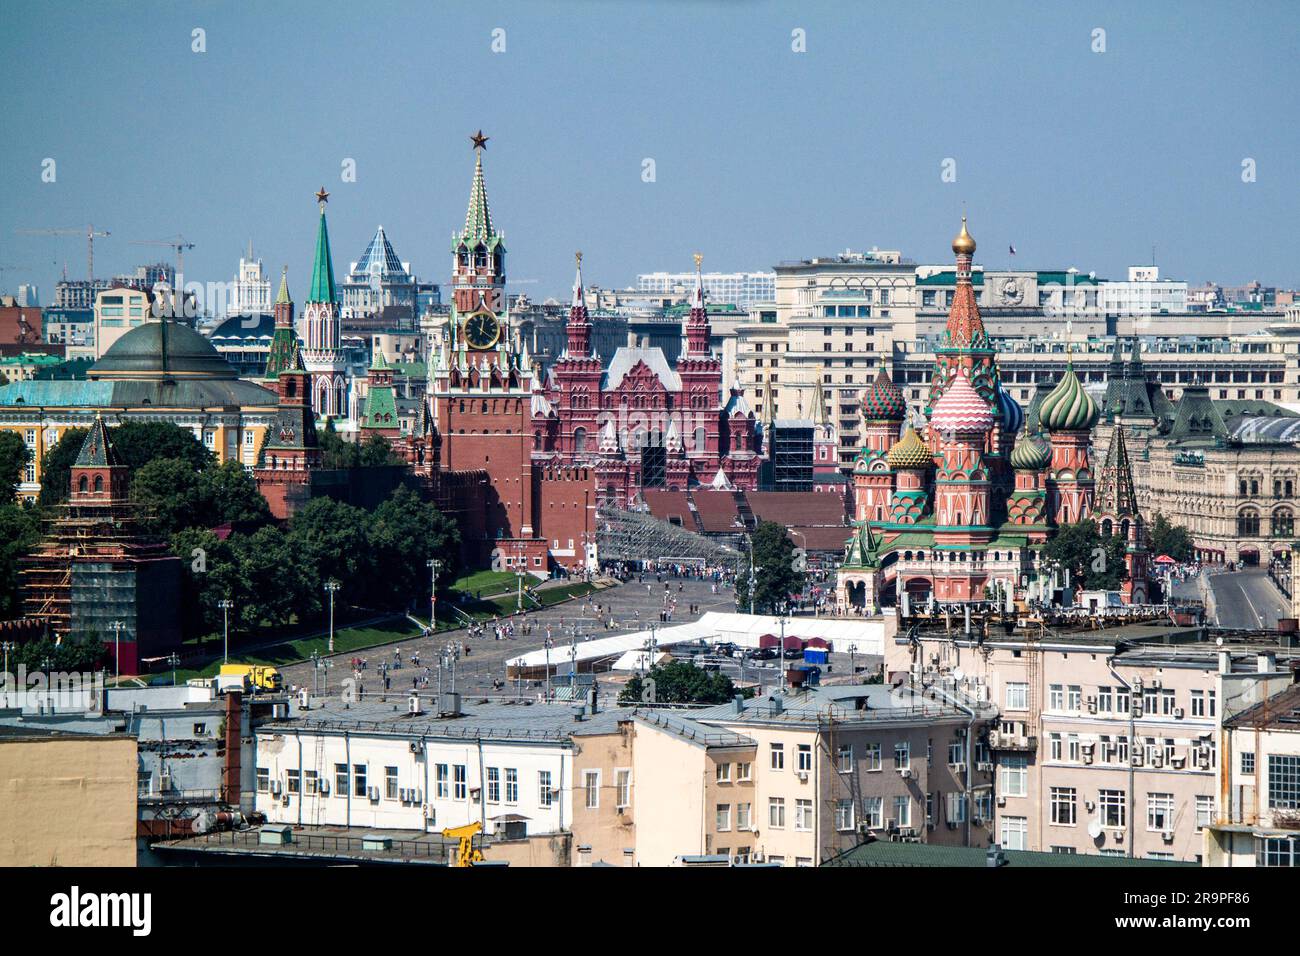 An areal view of the Red Square in central Moscow, Russia Stock Photo